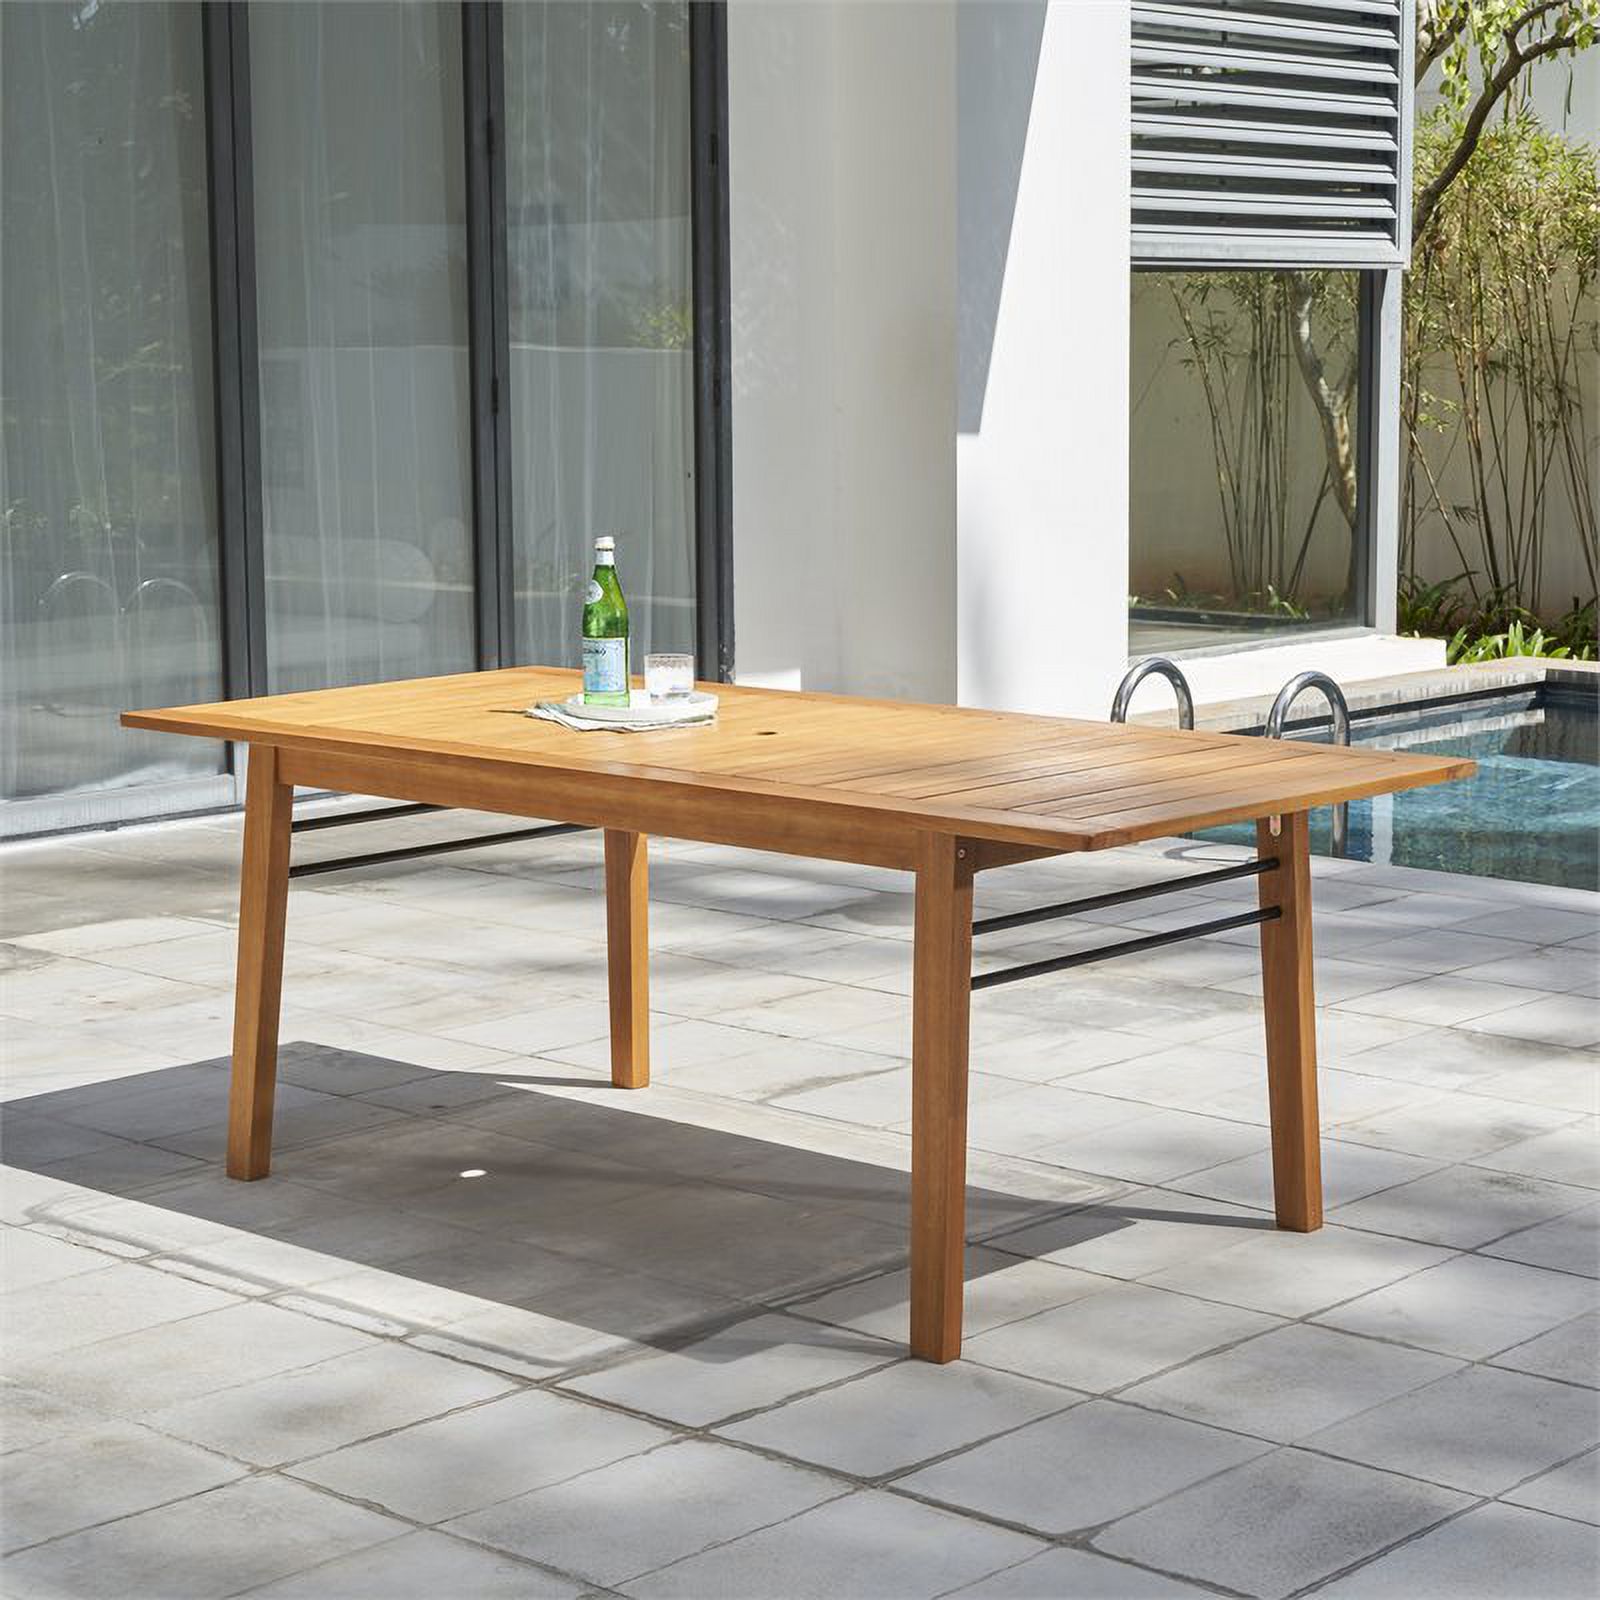 Gloucester Outdoor Patio Wood Dining Table - image 1 of 4